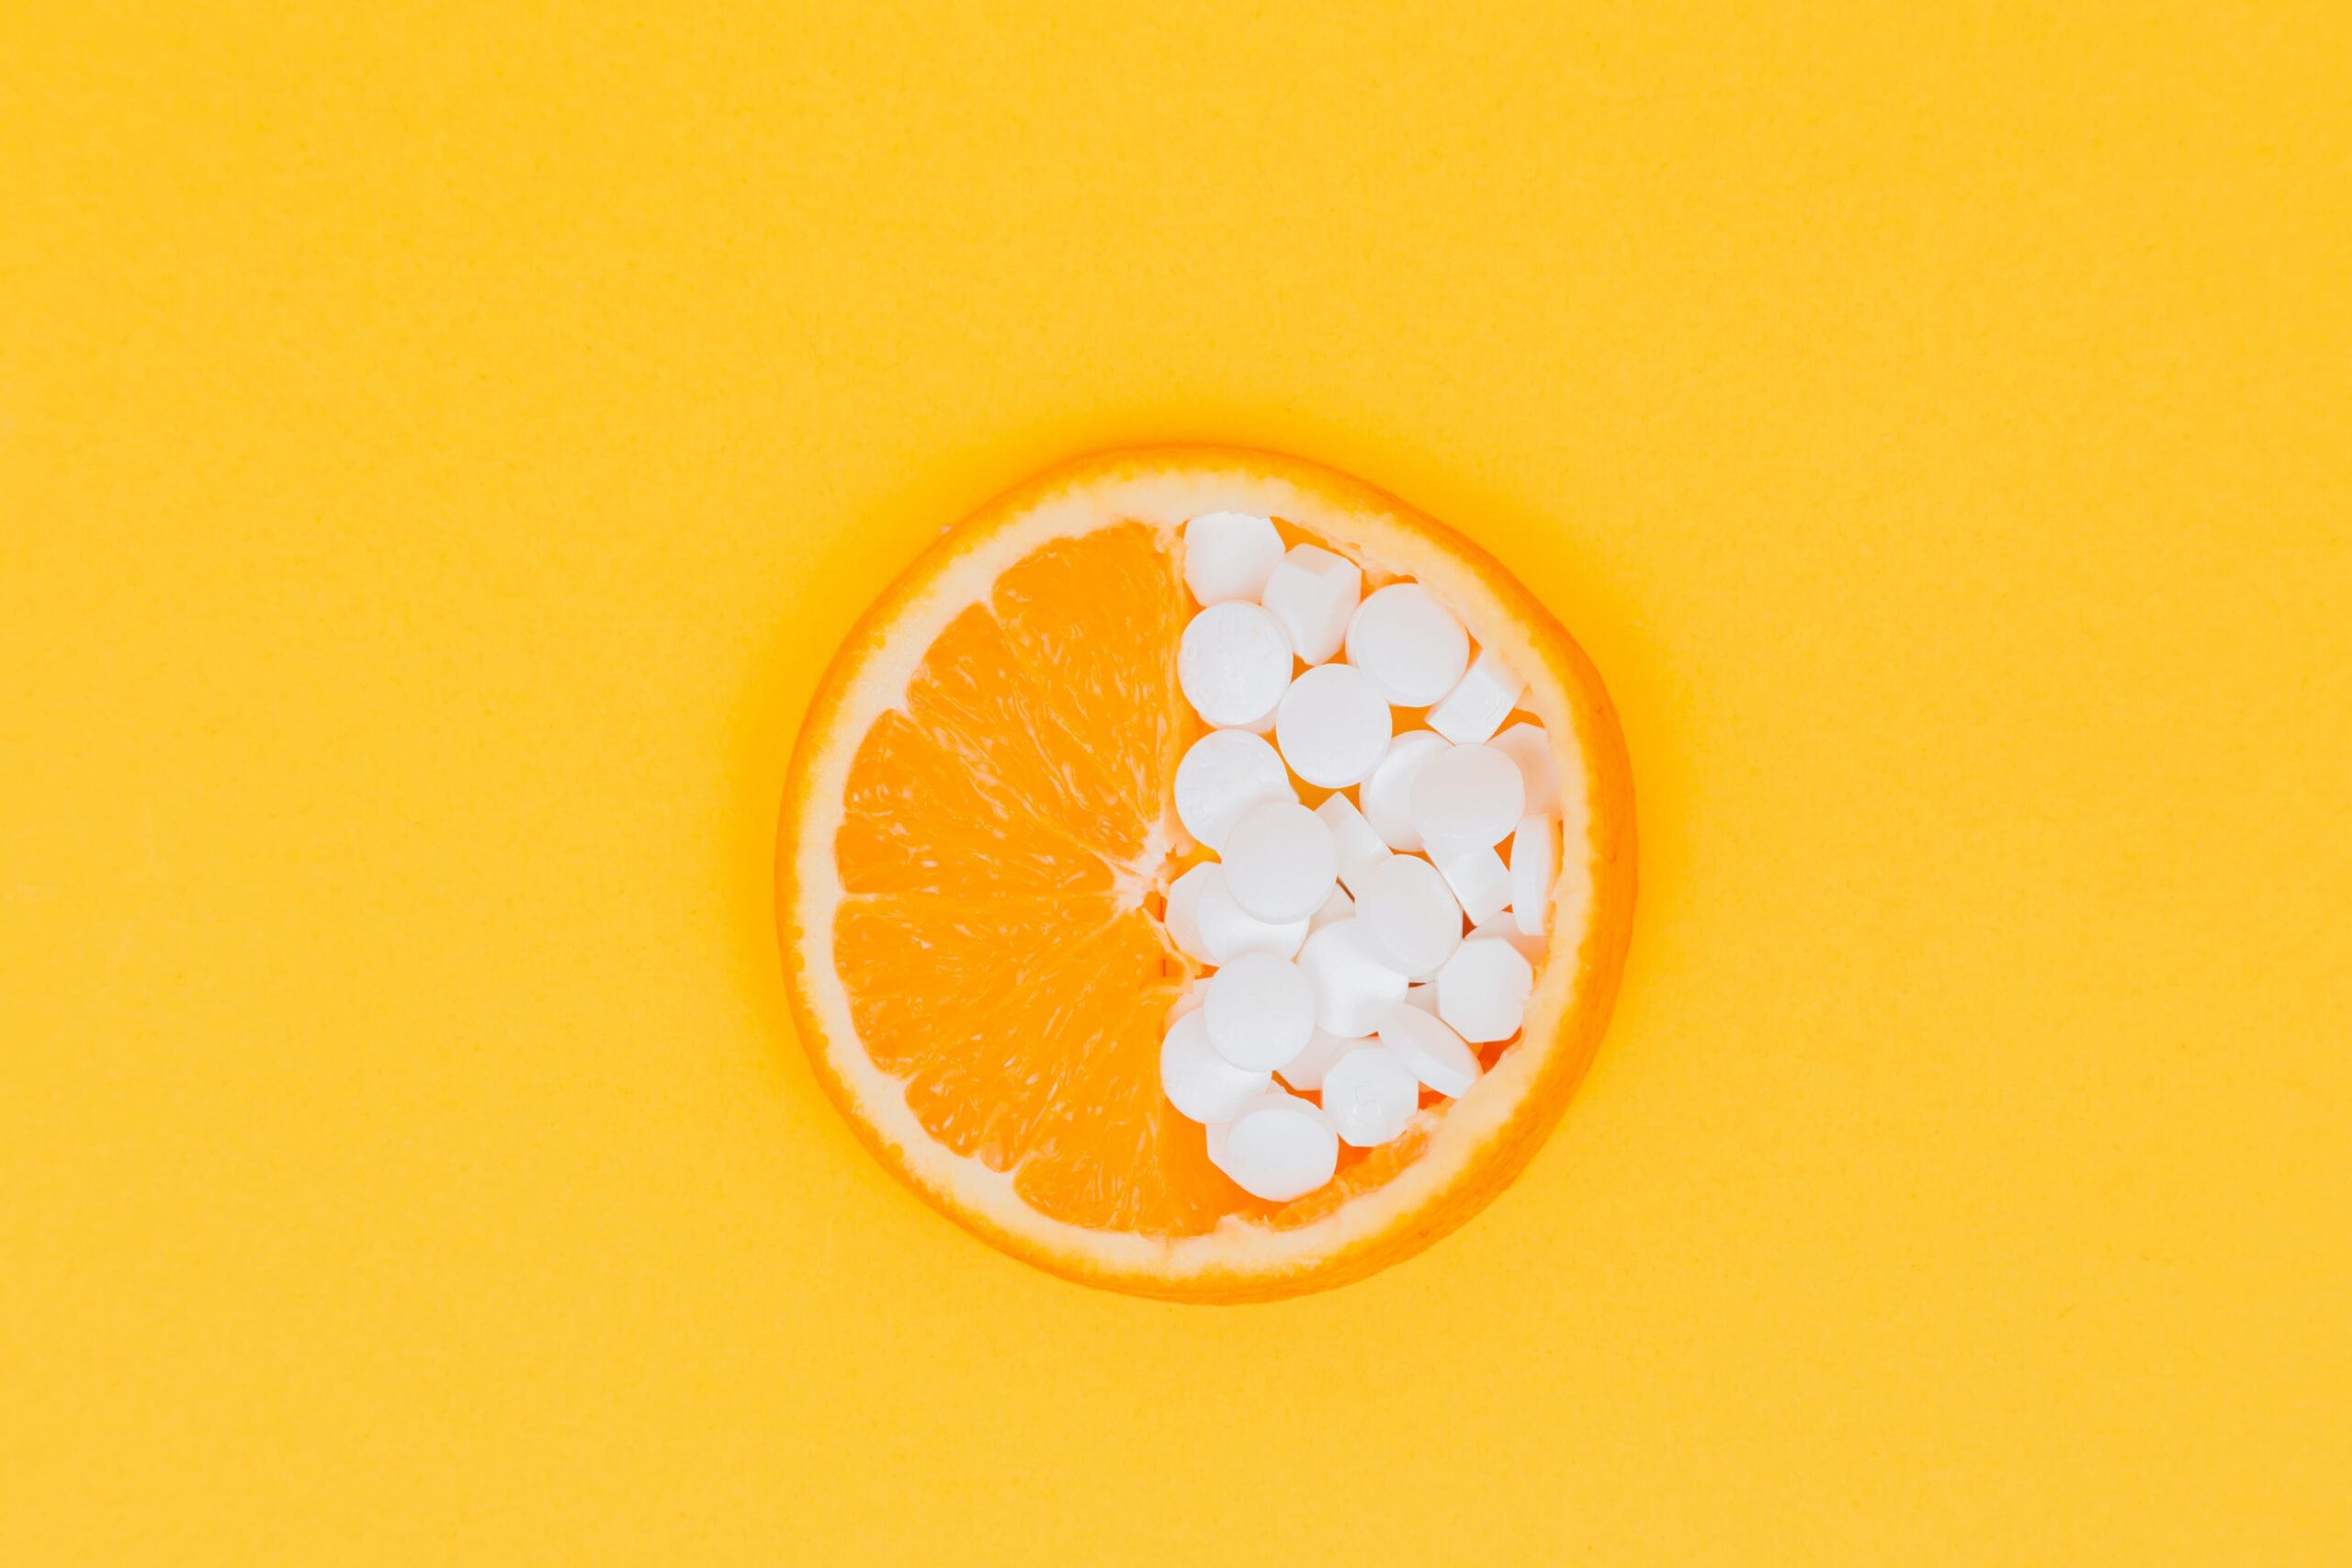 Does Vitamin C Help with Colds?